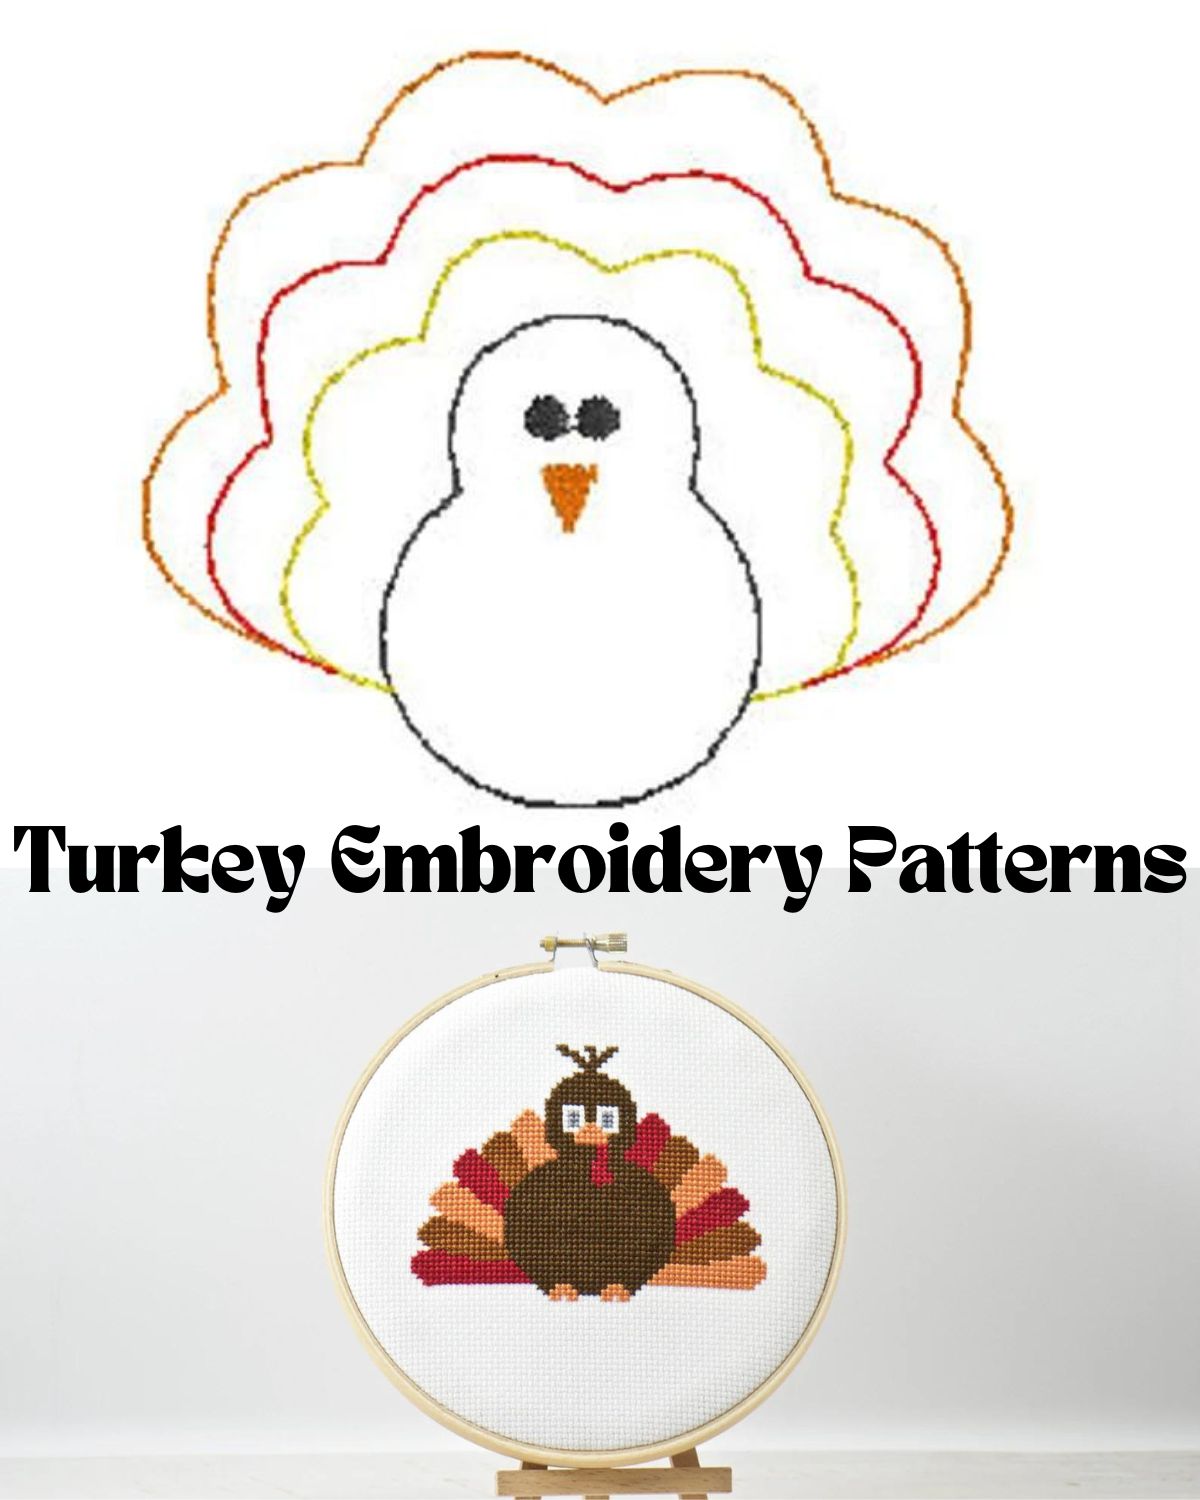 Two turkey embroidery pieces